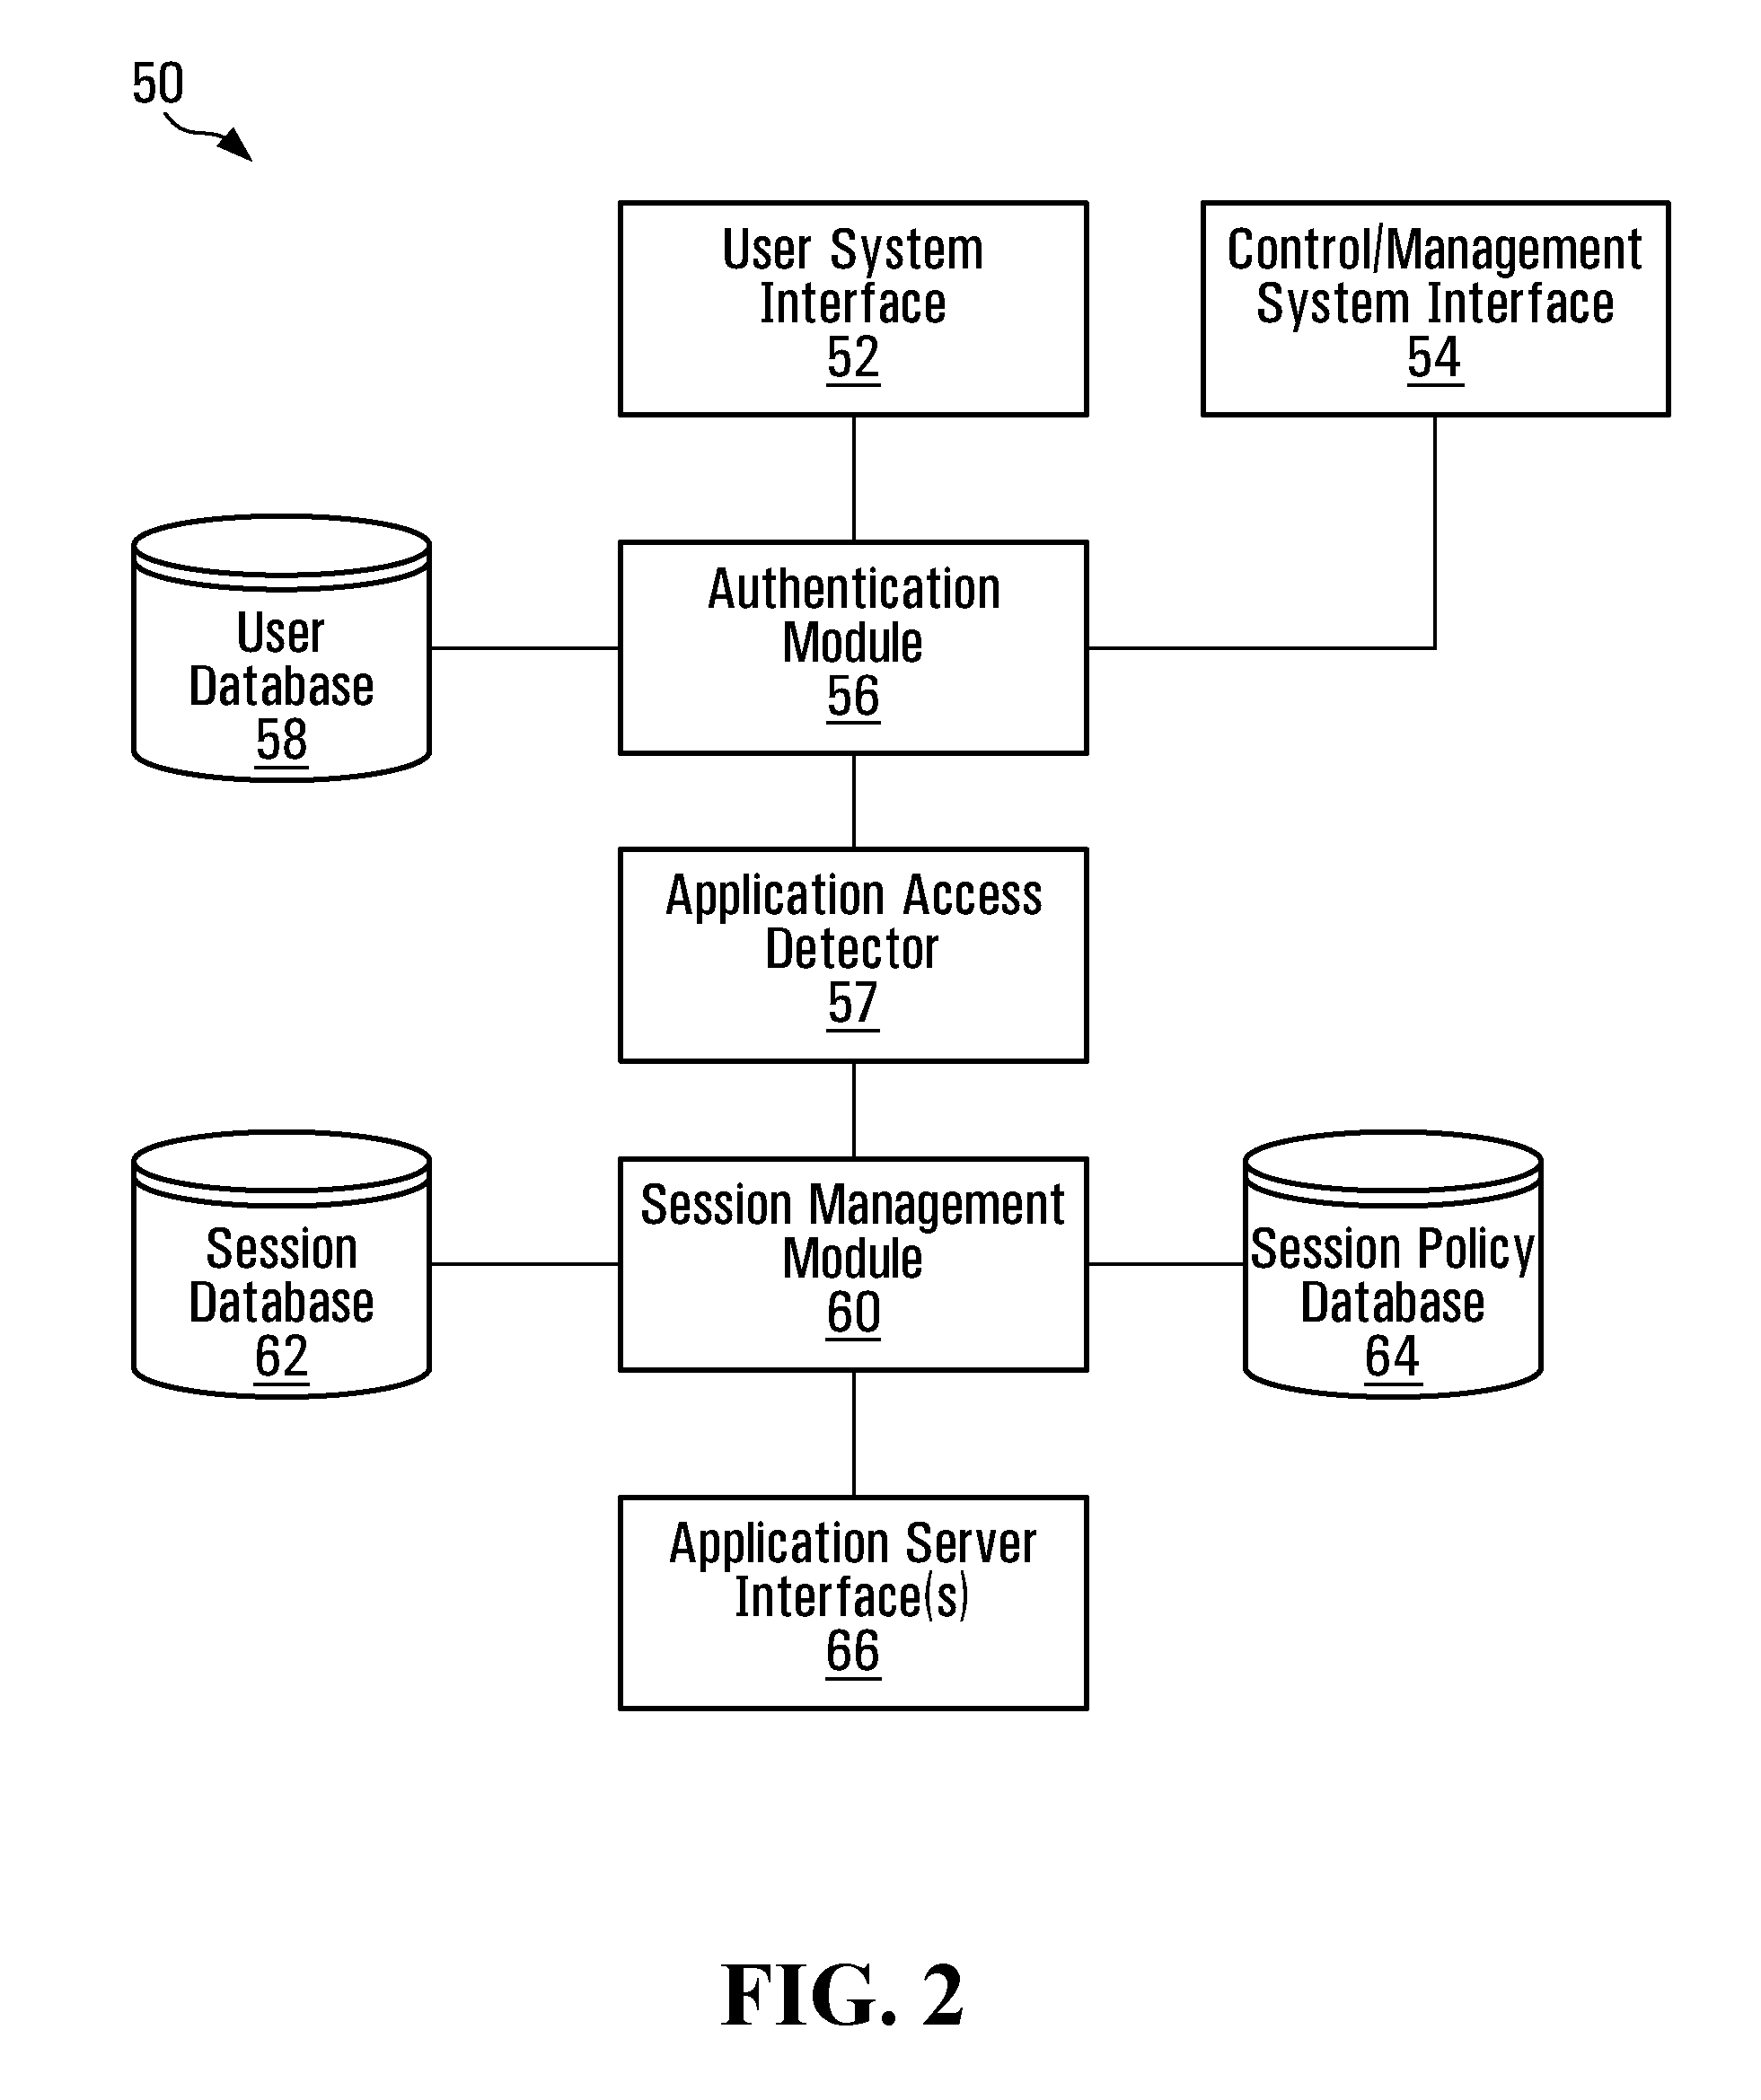 Communication network application activity monitoring and control